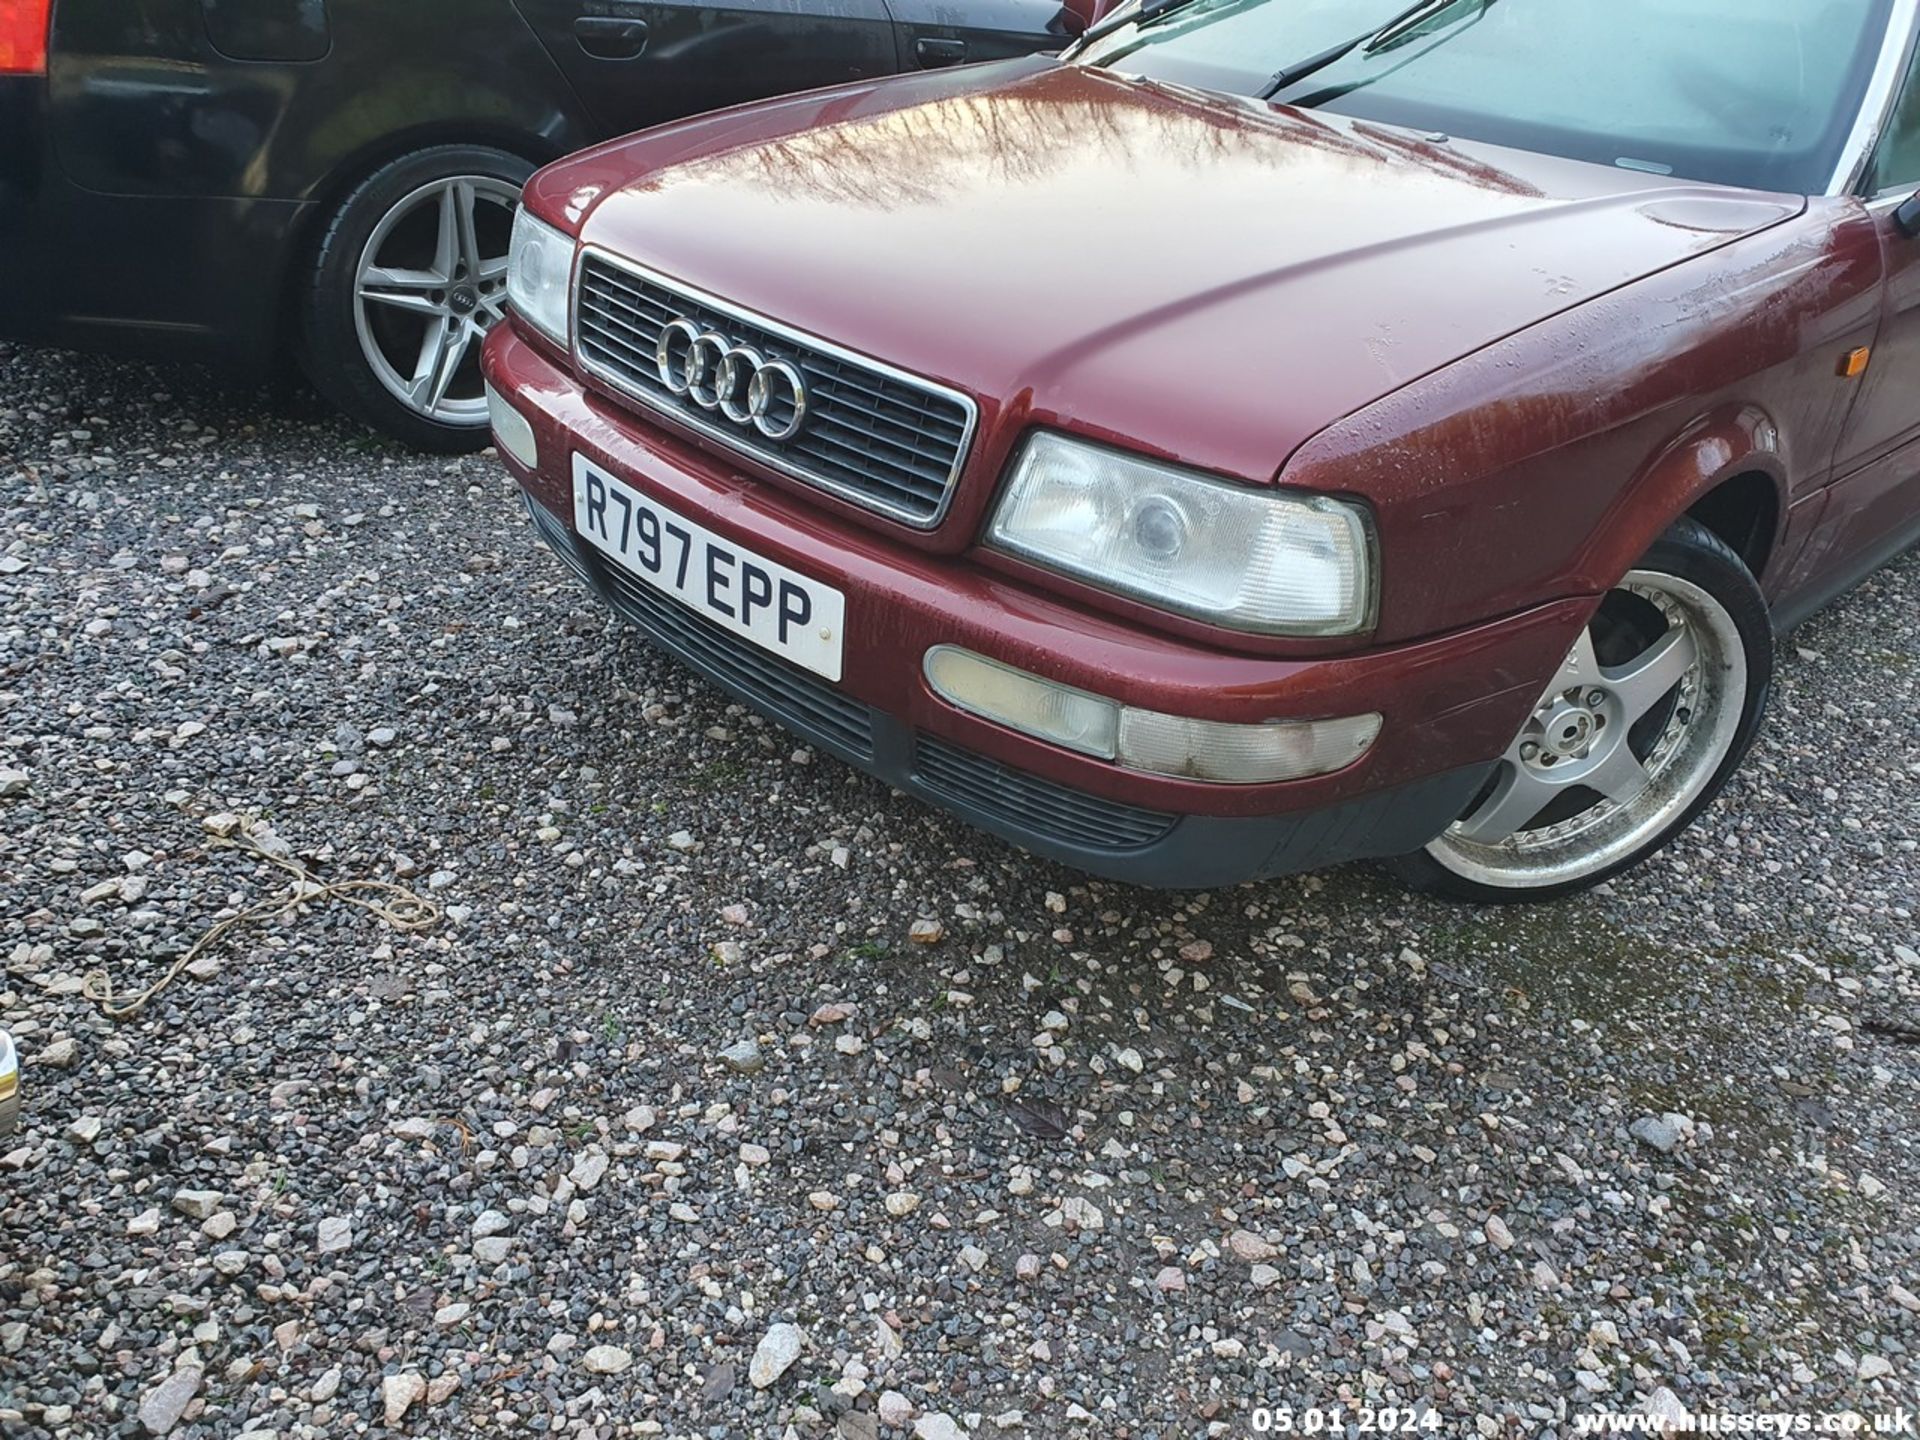 1998 AUDI CABRIOLET 1.8 - 1781cc 2dr Convertible (Red) - Image 3 of 39